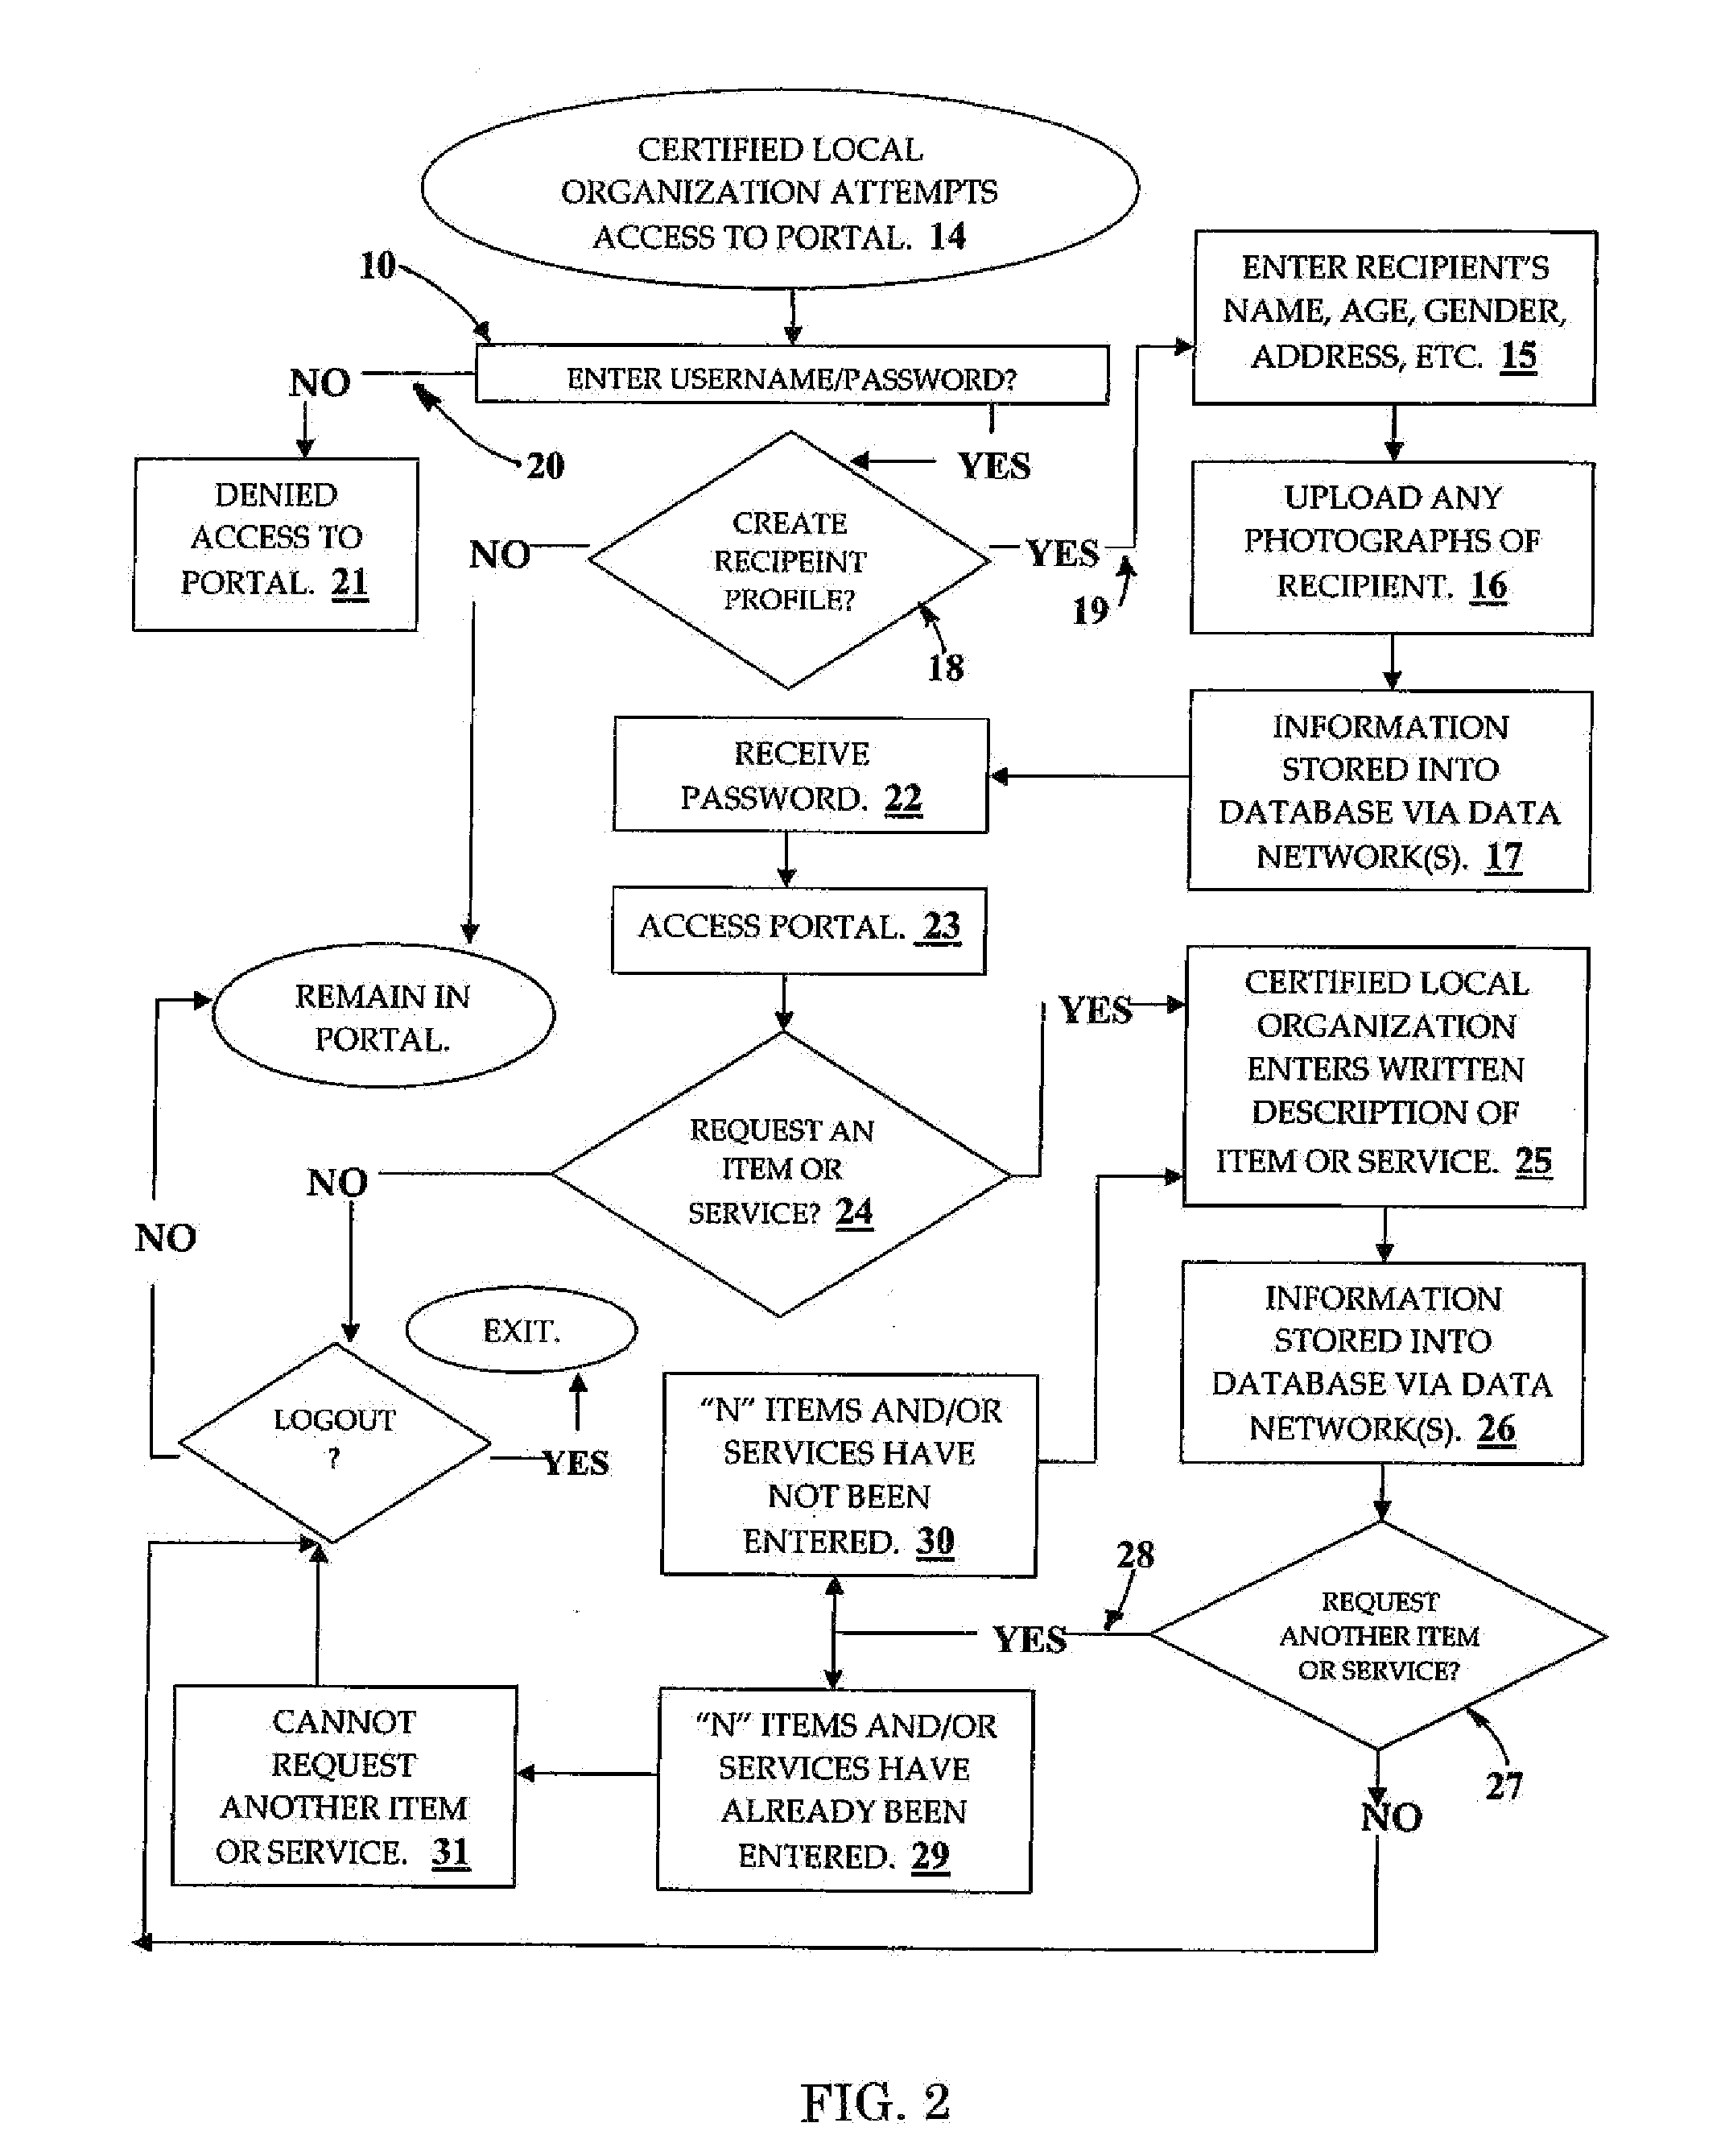 Method for facilitating the global donation of items and services